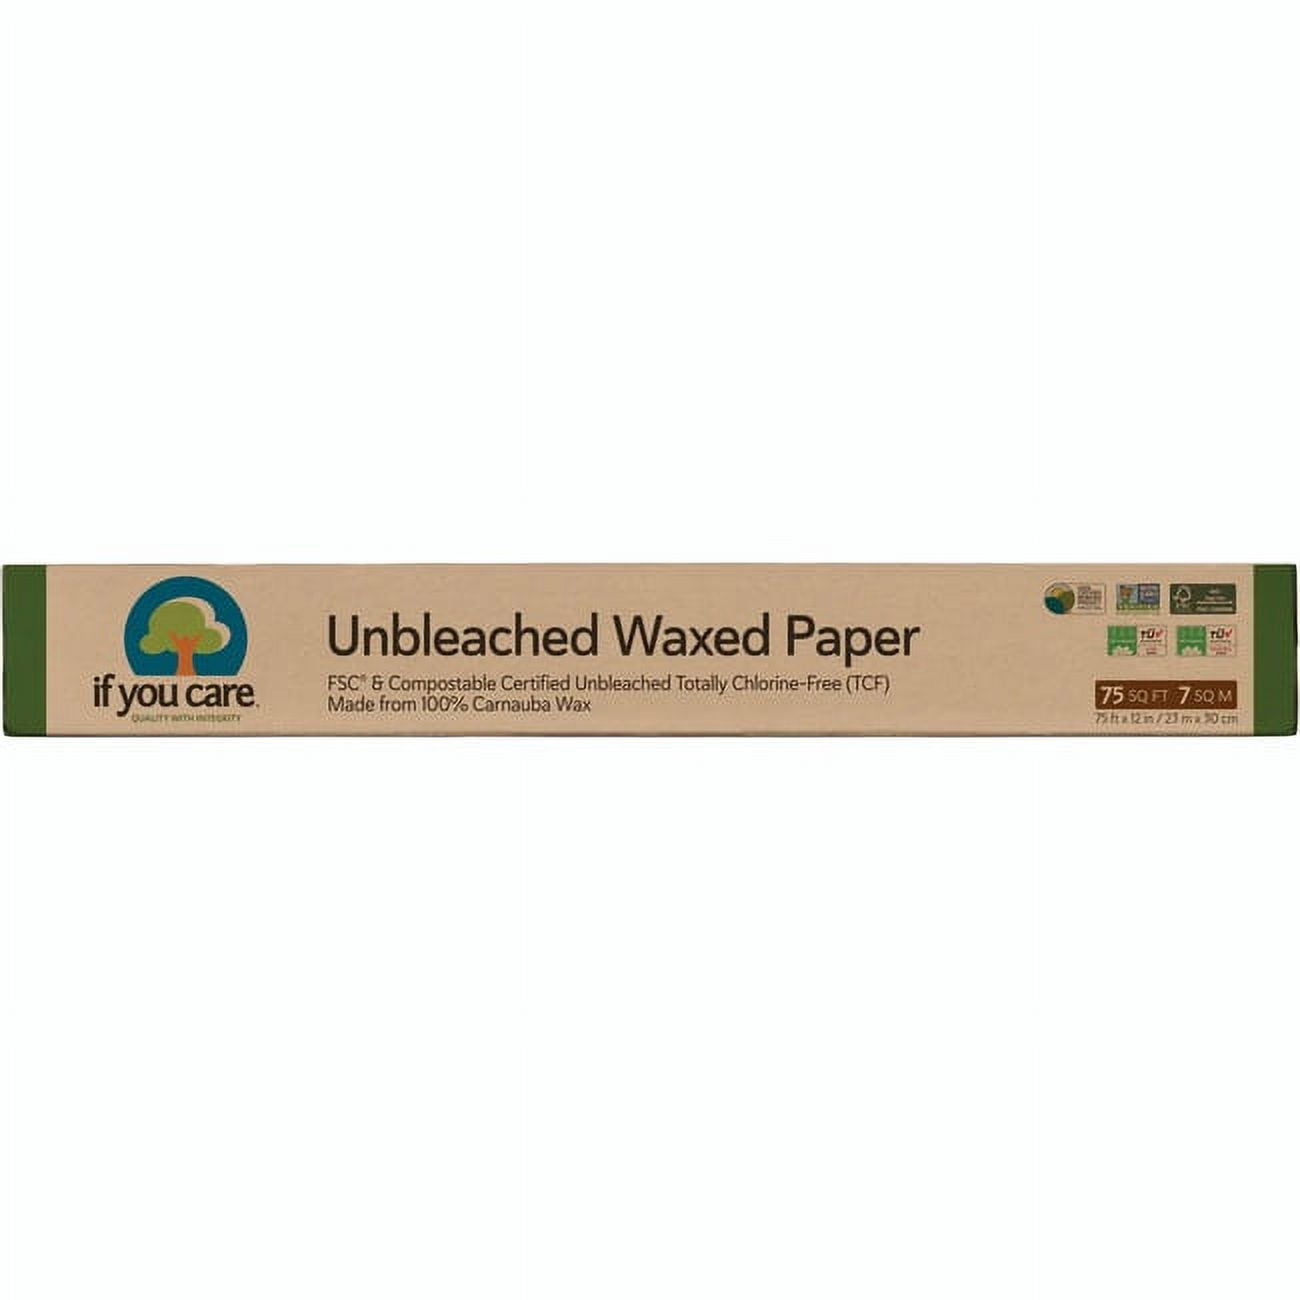 Unbleached Wax Paper at Whole Foods Market